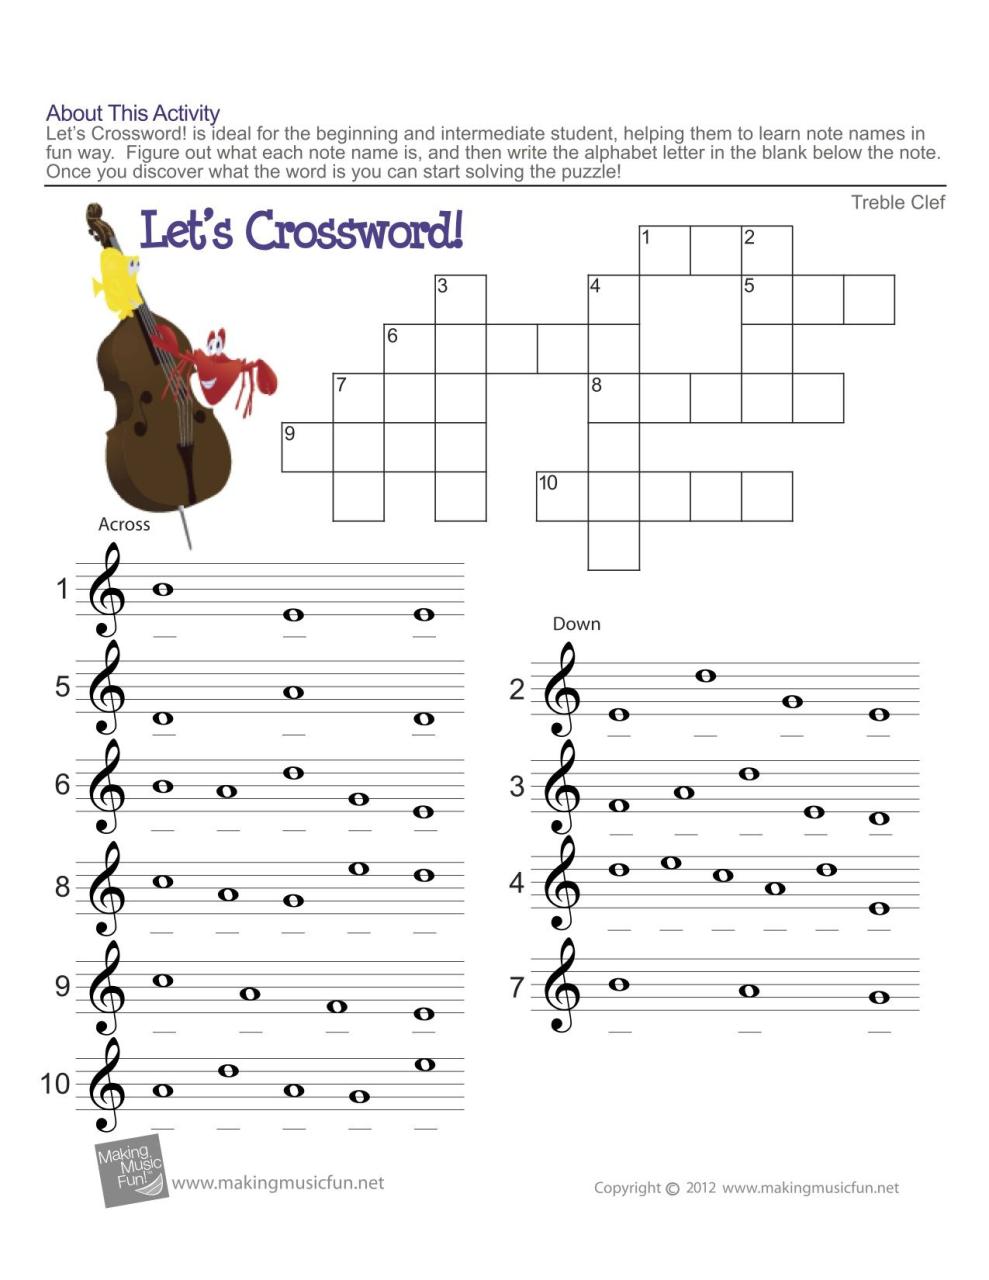 Bass Clef Ledger Lines Only Note Recognition Worksheet In 2019